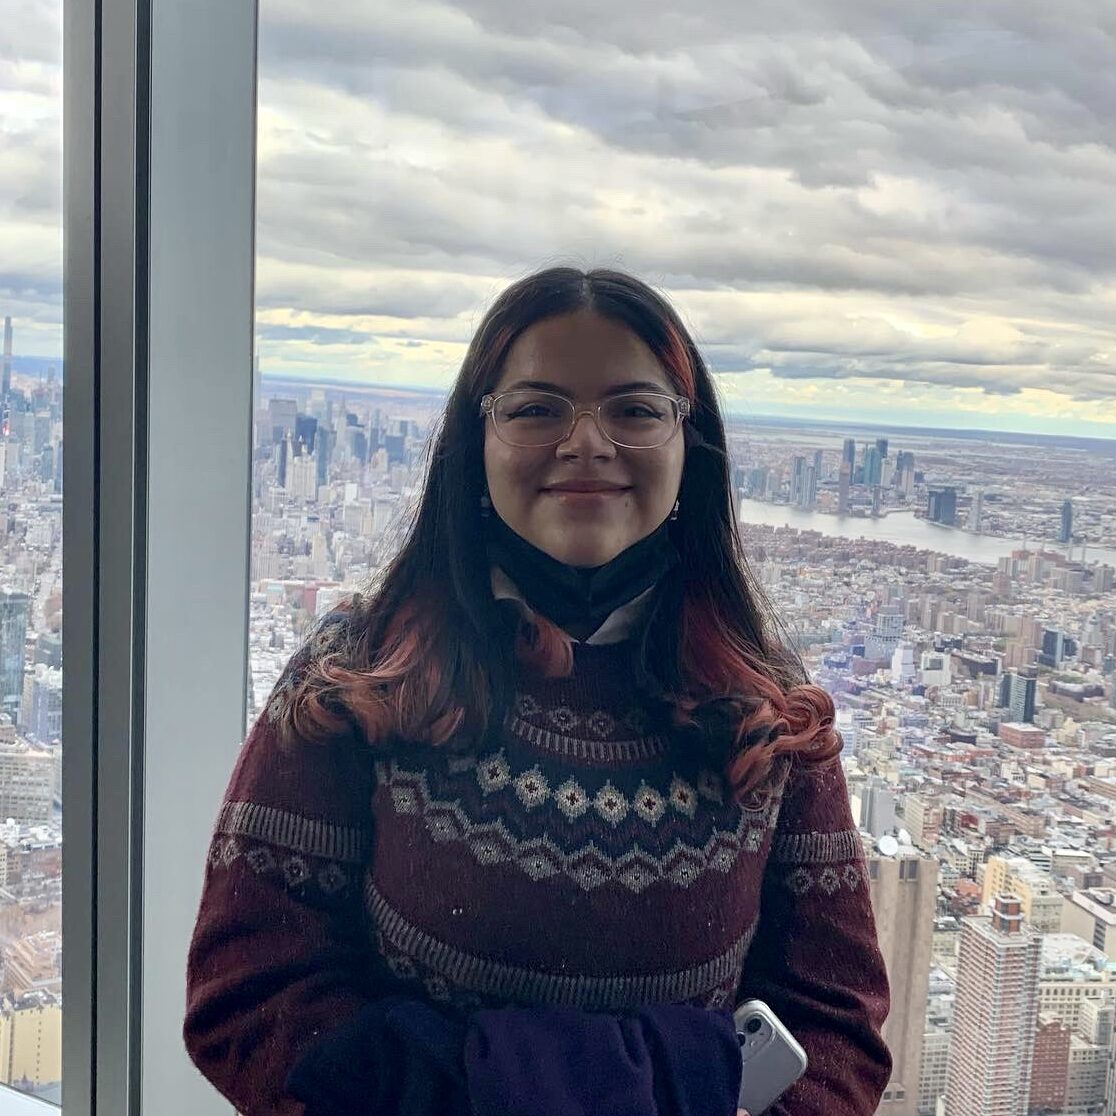 This is me at the top of the One World Trade Center in New York City